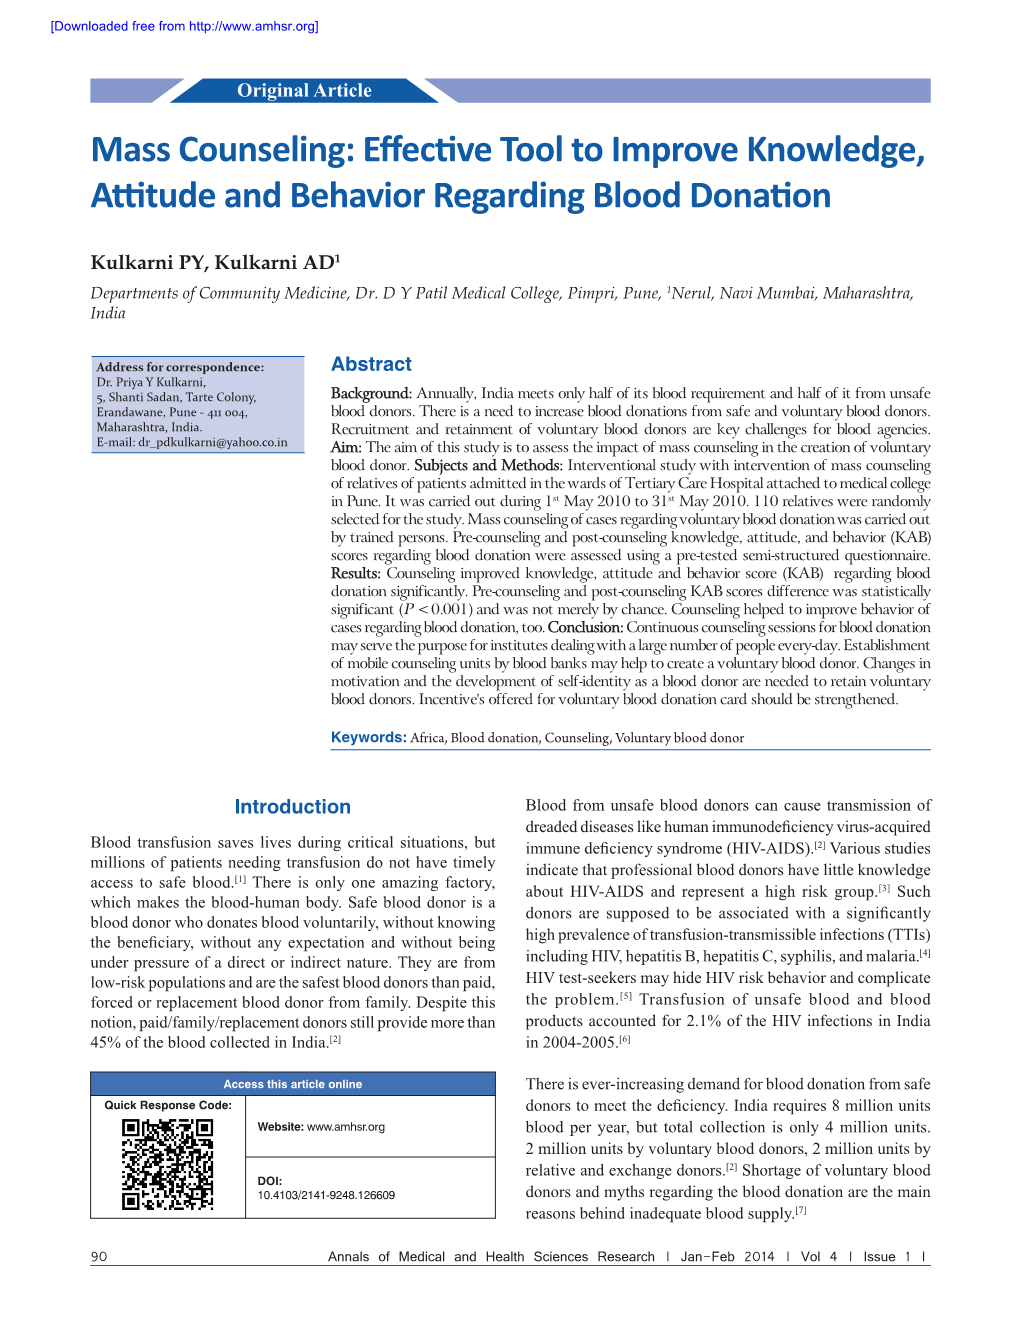 Mass Counseling: Effective Tool to Improve Knowledge, Attitude and Behavior Regarding Blood Donation